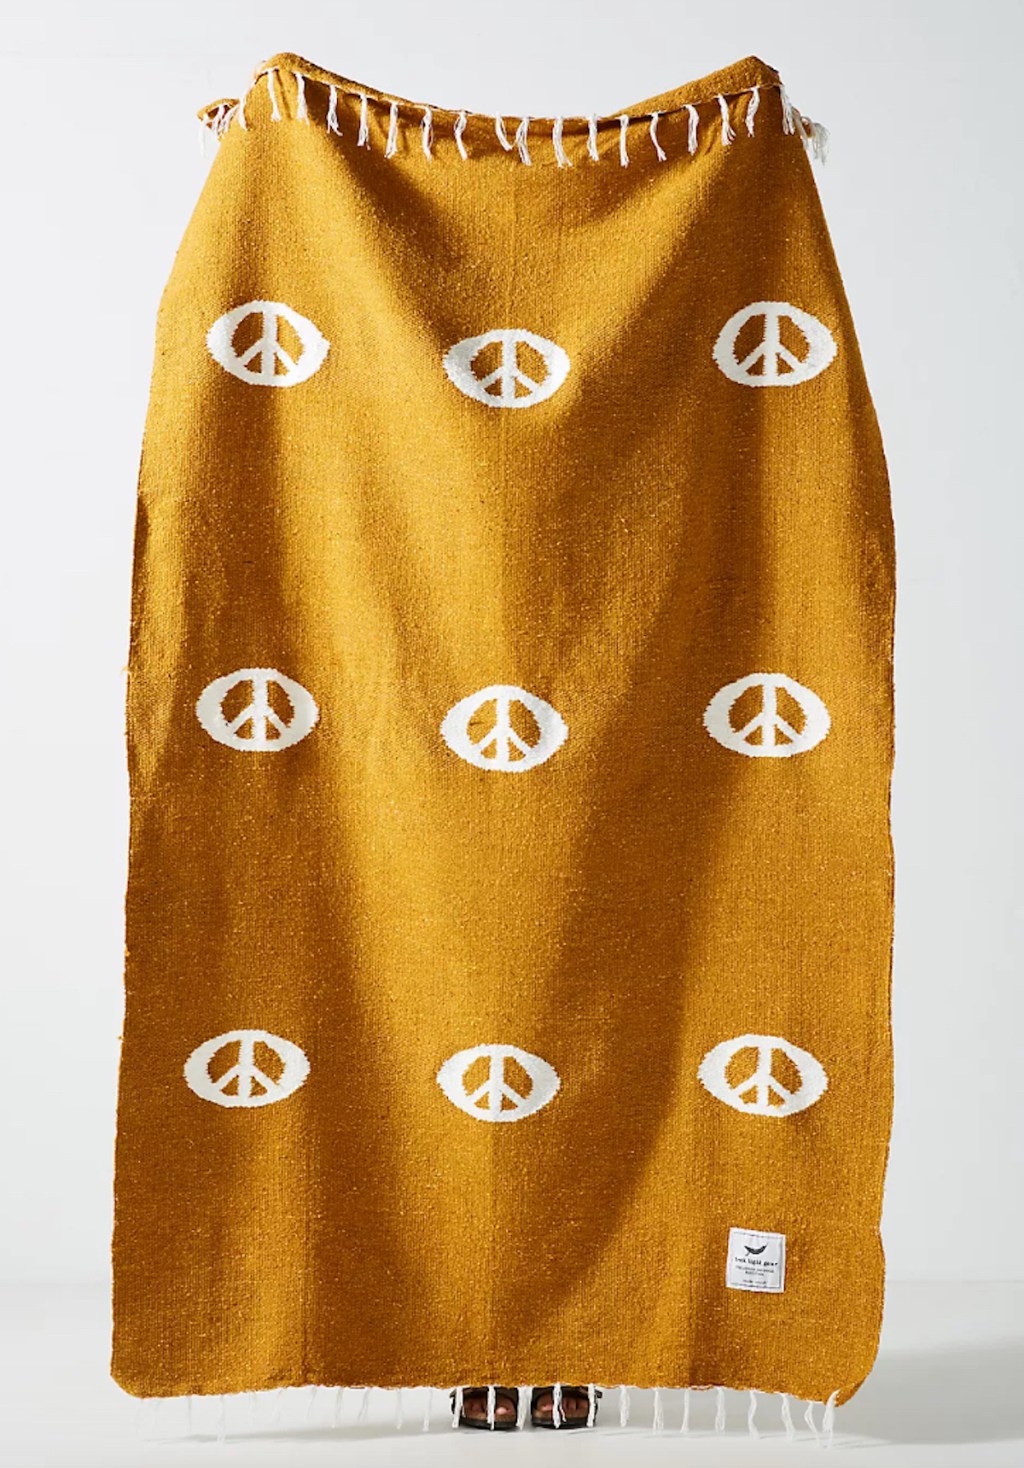 mustard colored peace sign anthropologie blanket being held up in white room